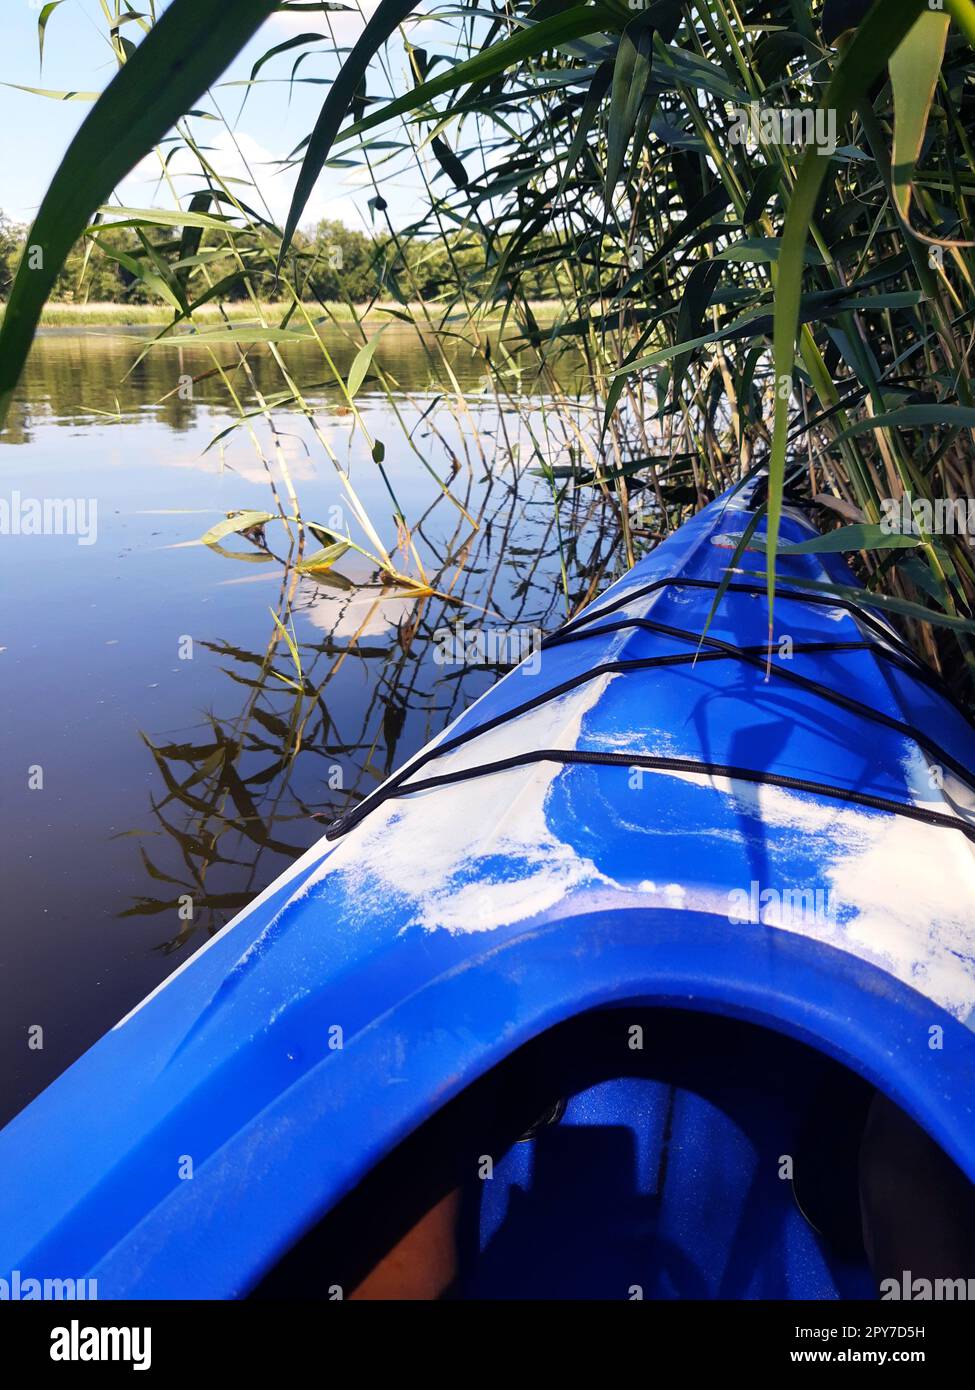 Kayak in the reed beds on the surface of the water Stock Photo